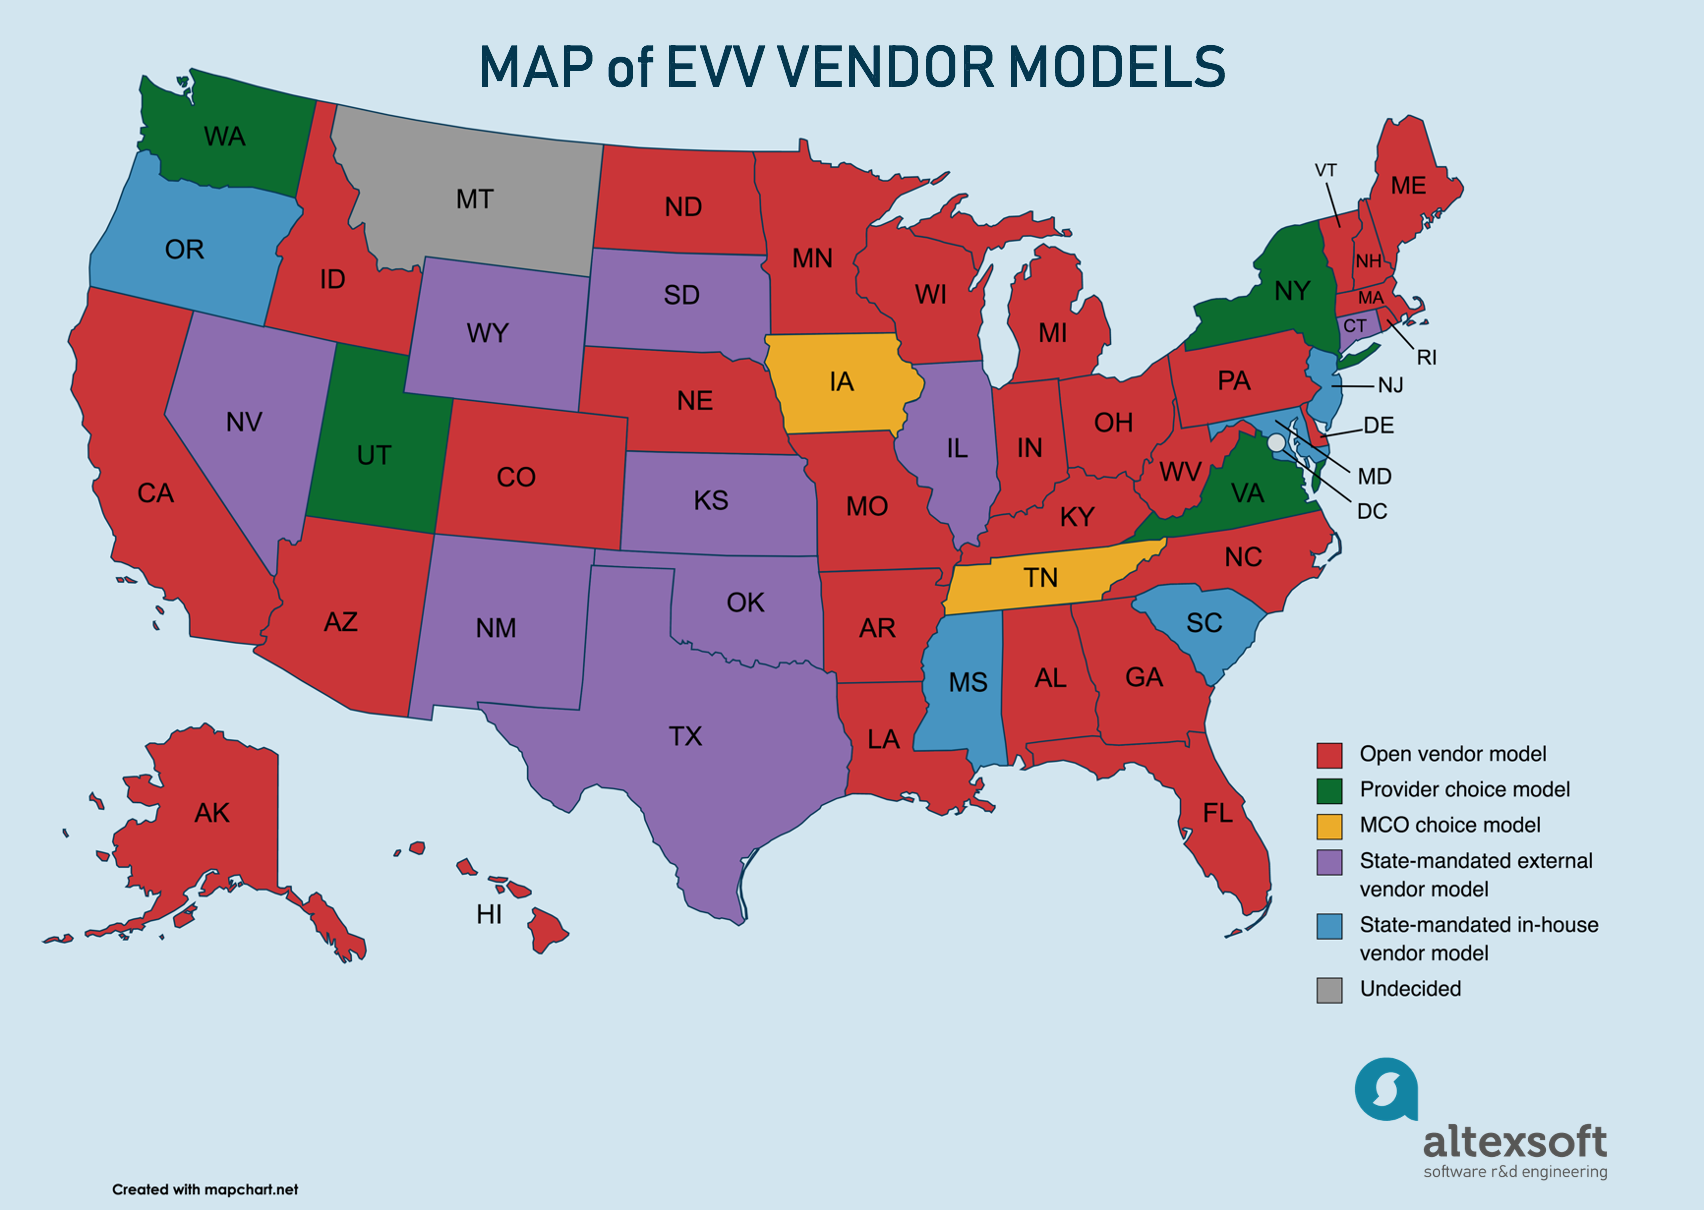 Overview of states and their EVV vendor models